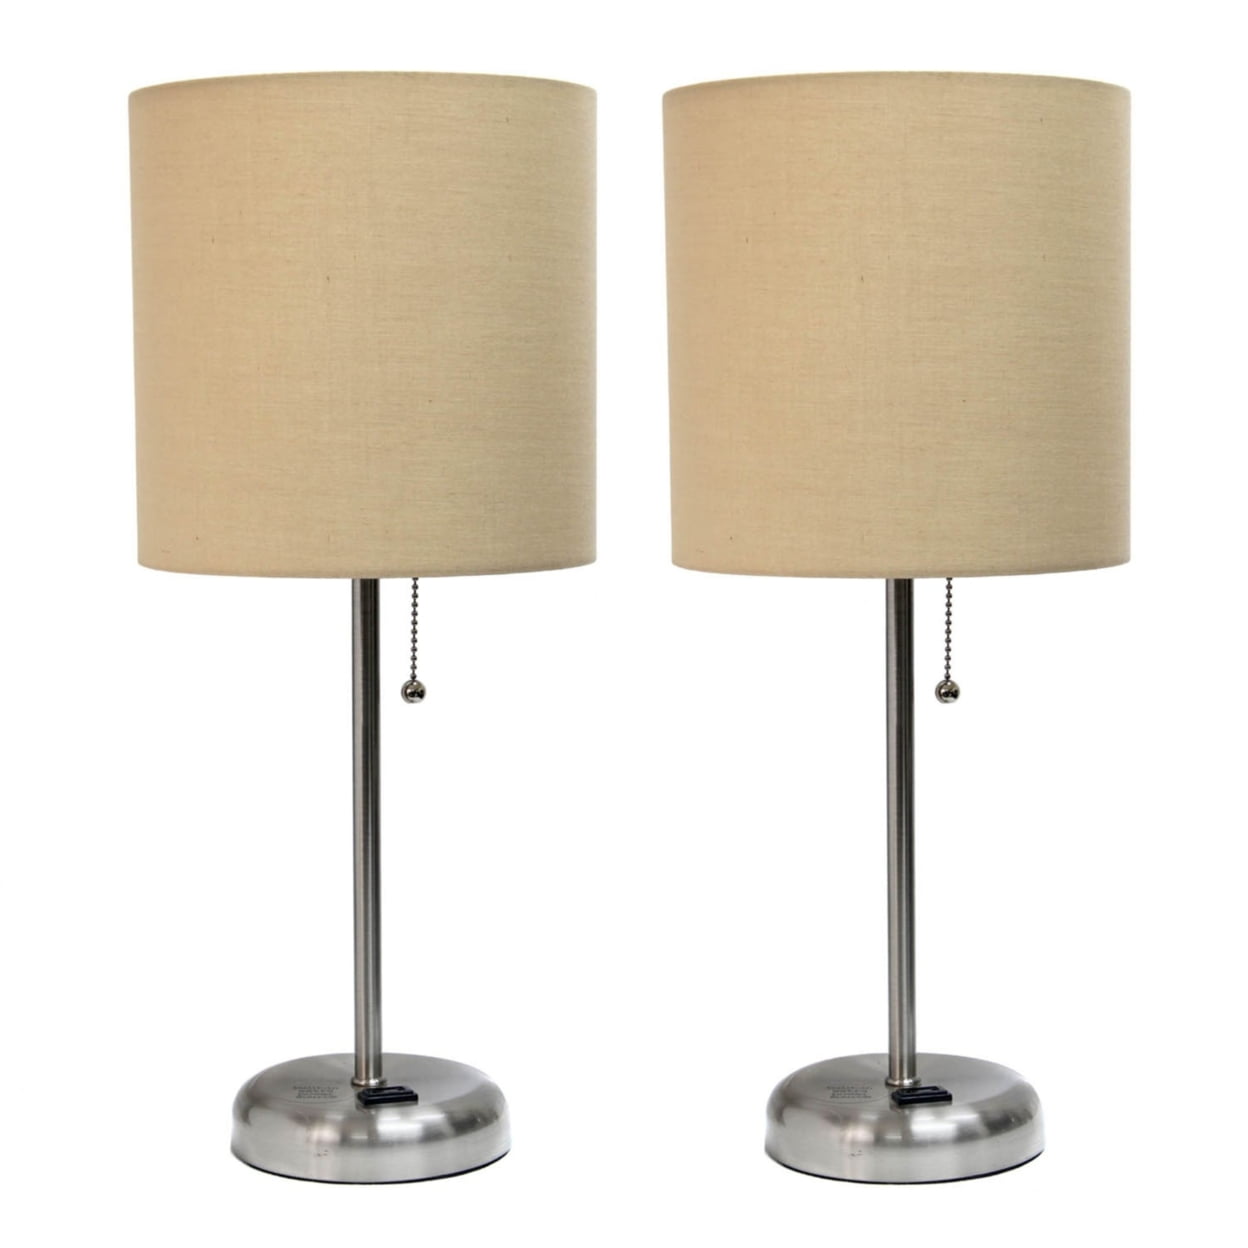 Lc2001-tan-2pk Brushed Steel Stick Table Lamp With Charging Outlet & Fabric Shade, Tan - Set Of 2